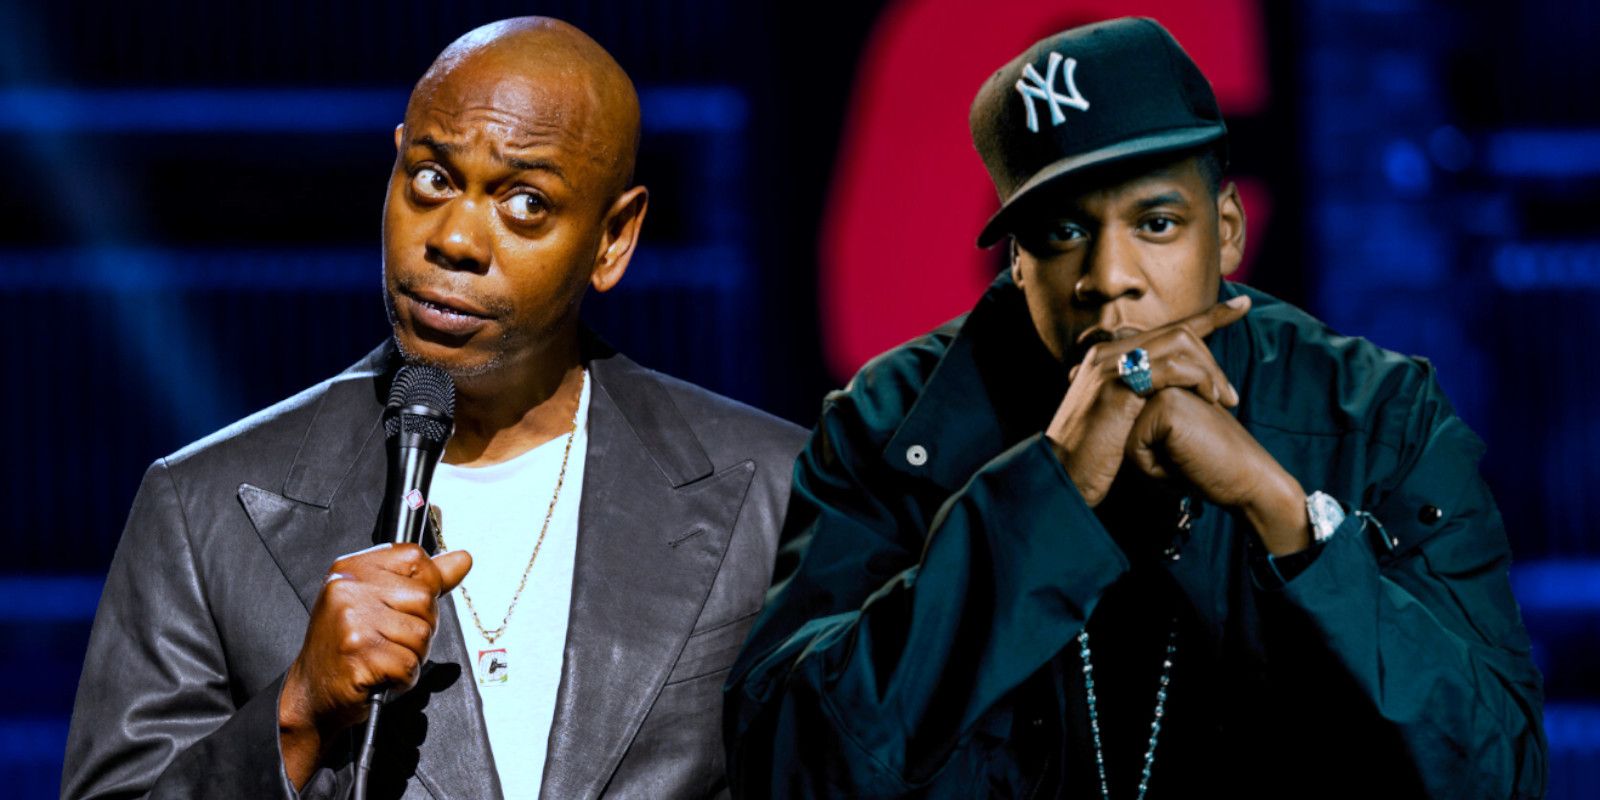 Jay-Z besides Dave Chappelle on stage